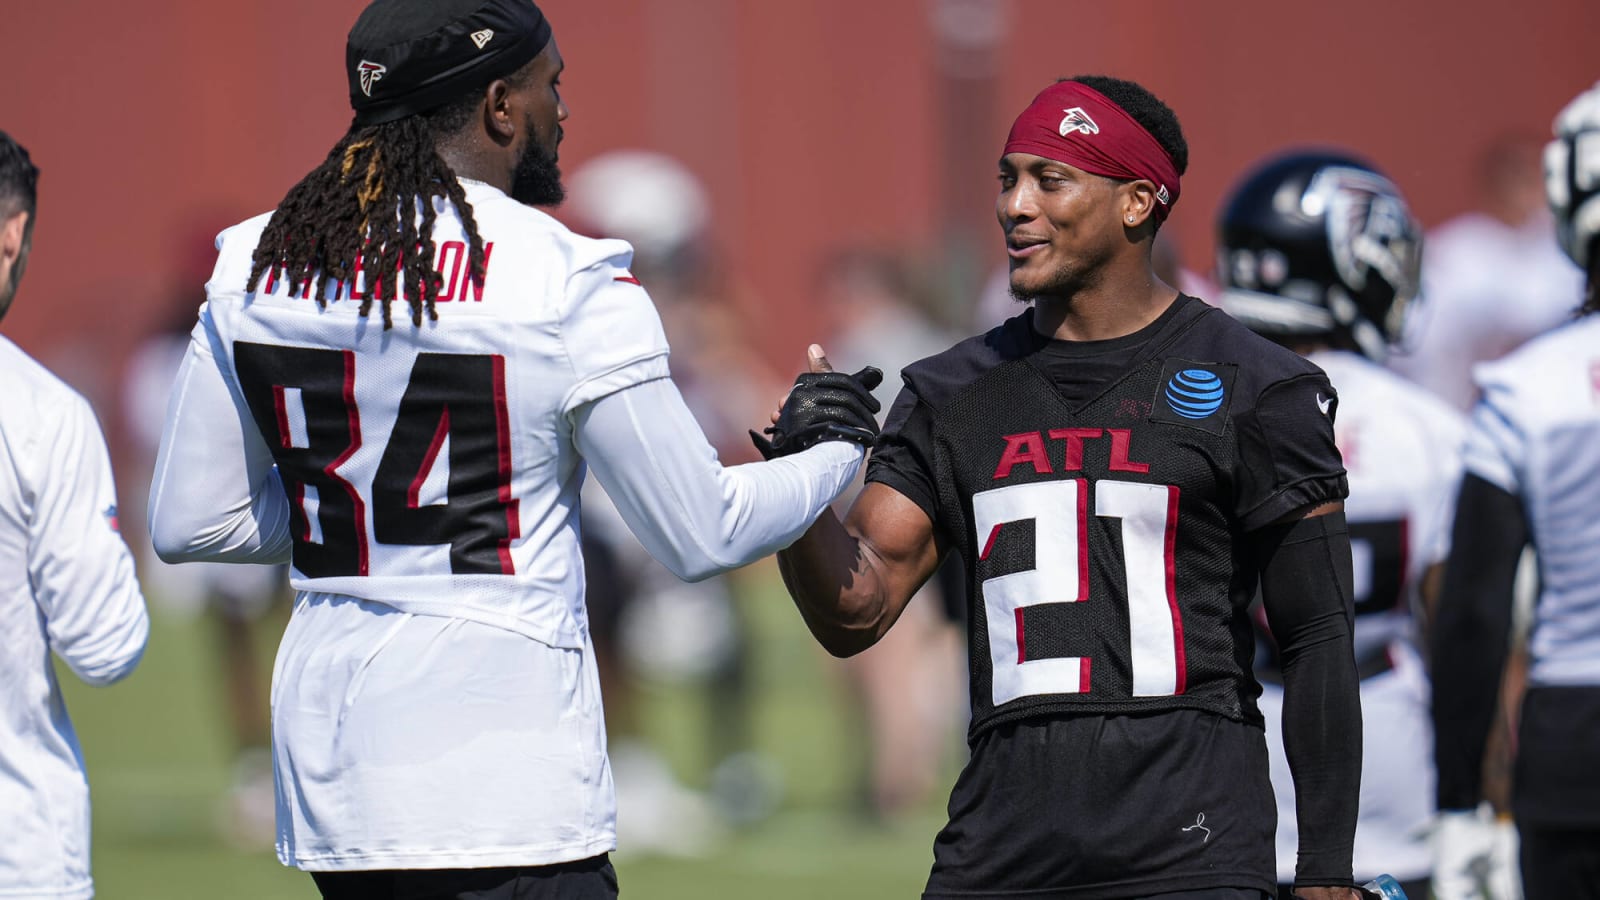 &#39;I Feel Ready!&#39; Falcons DB Mike Hughes Injury Status Uncertain vs. Panthers